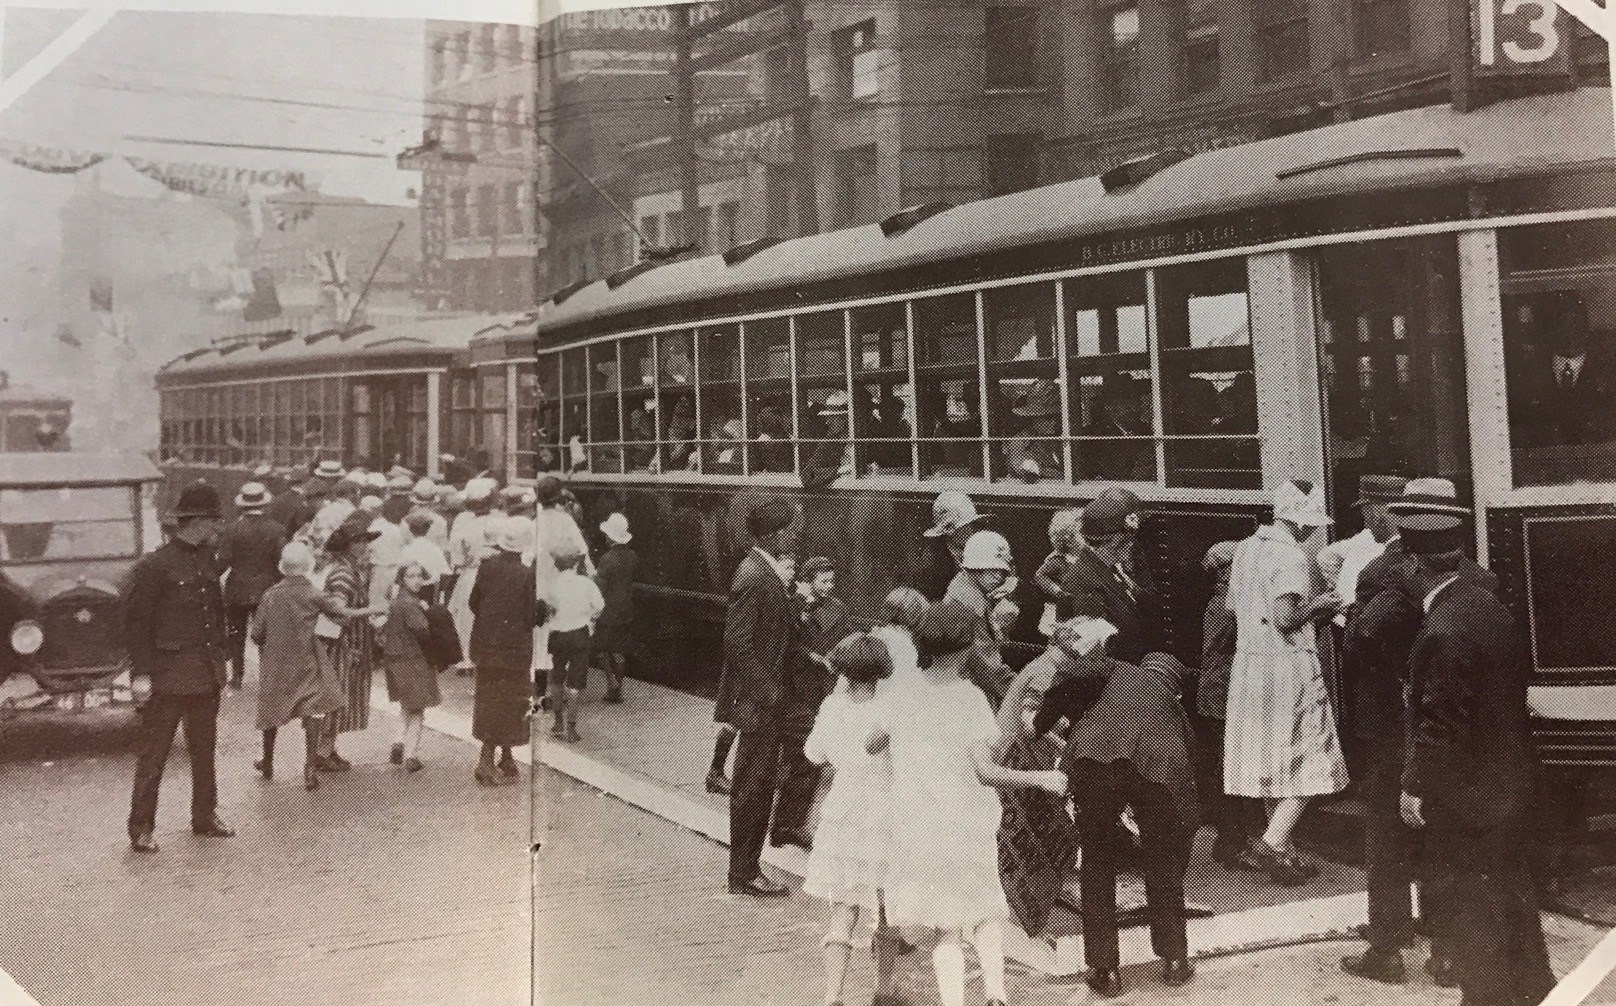 streetcar in early 1920s -1940s